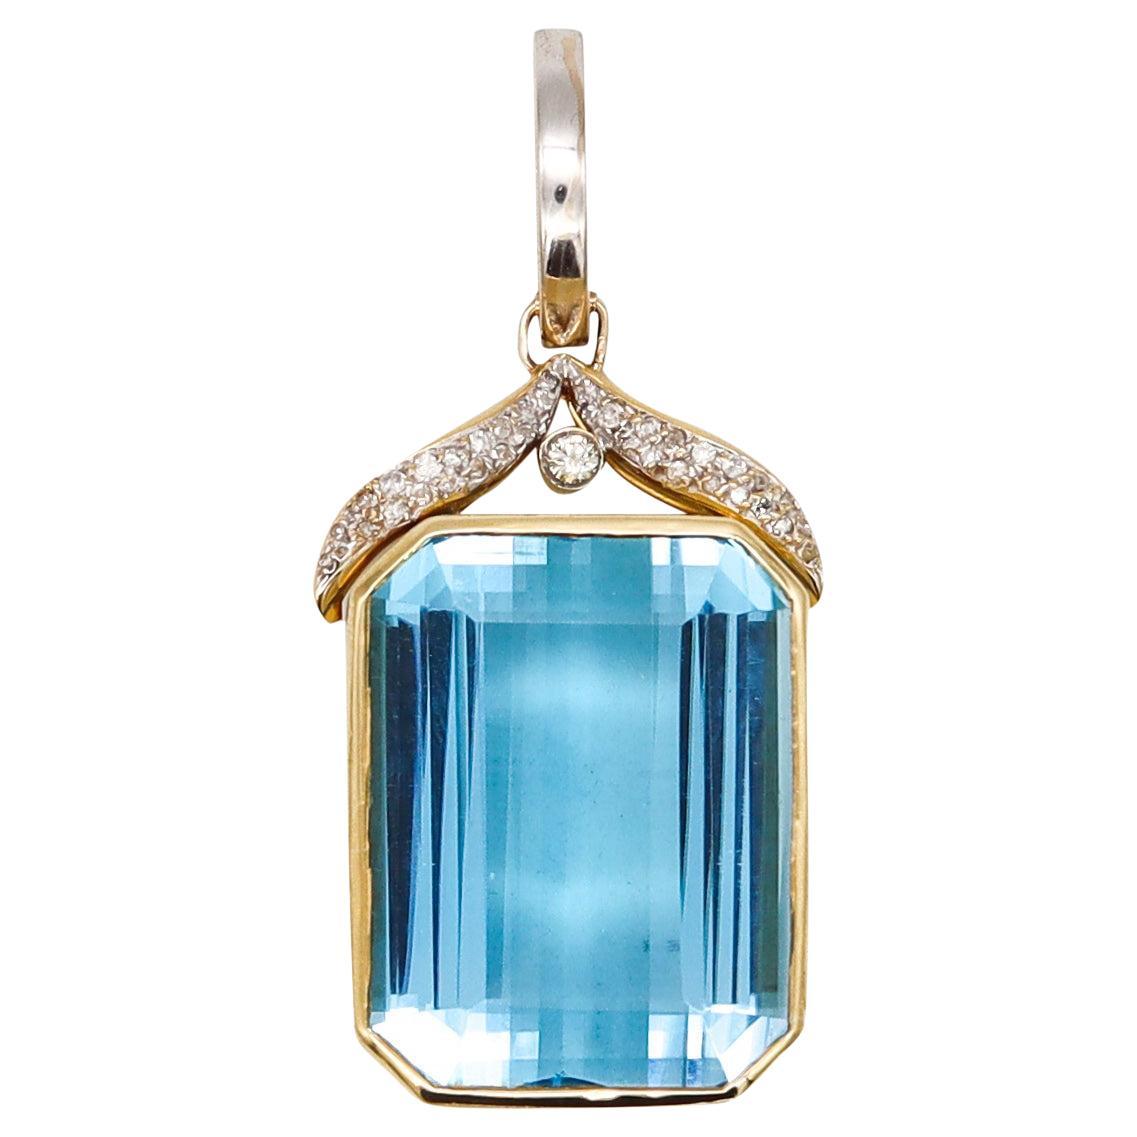 Contemporary Large Pendant In 18Kt Gold With 72.06 Ctw In Aquamarine & Diamonds For Sale